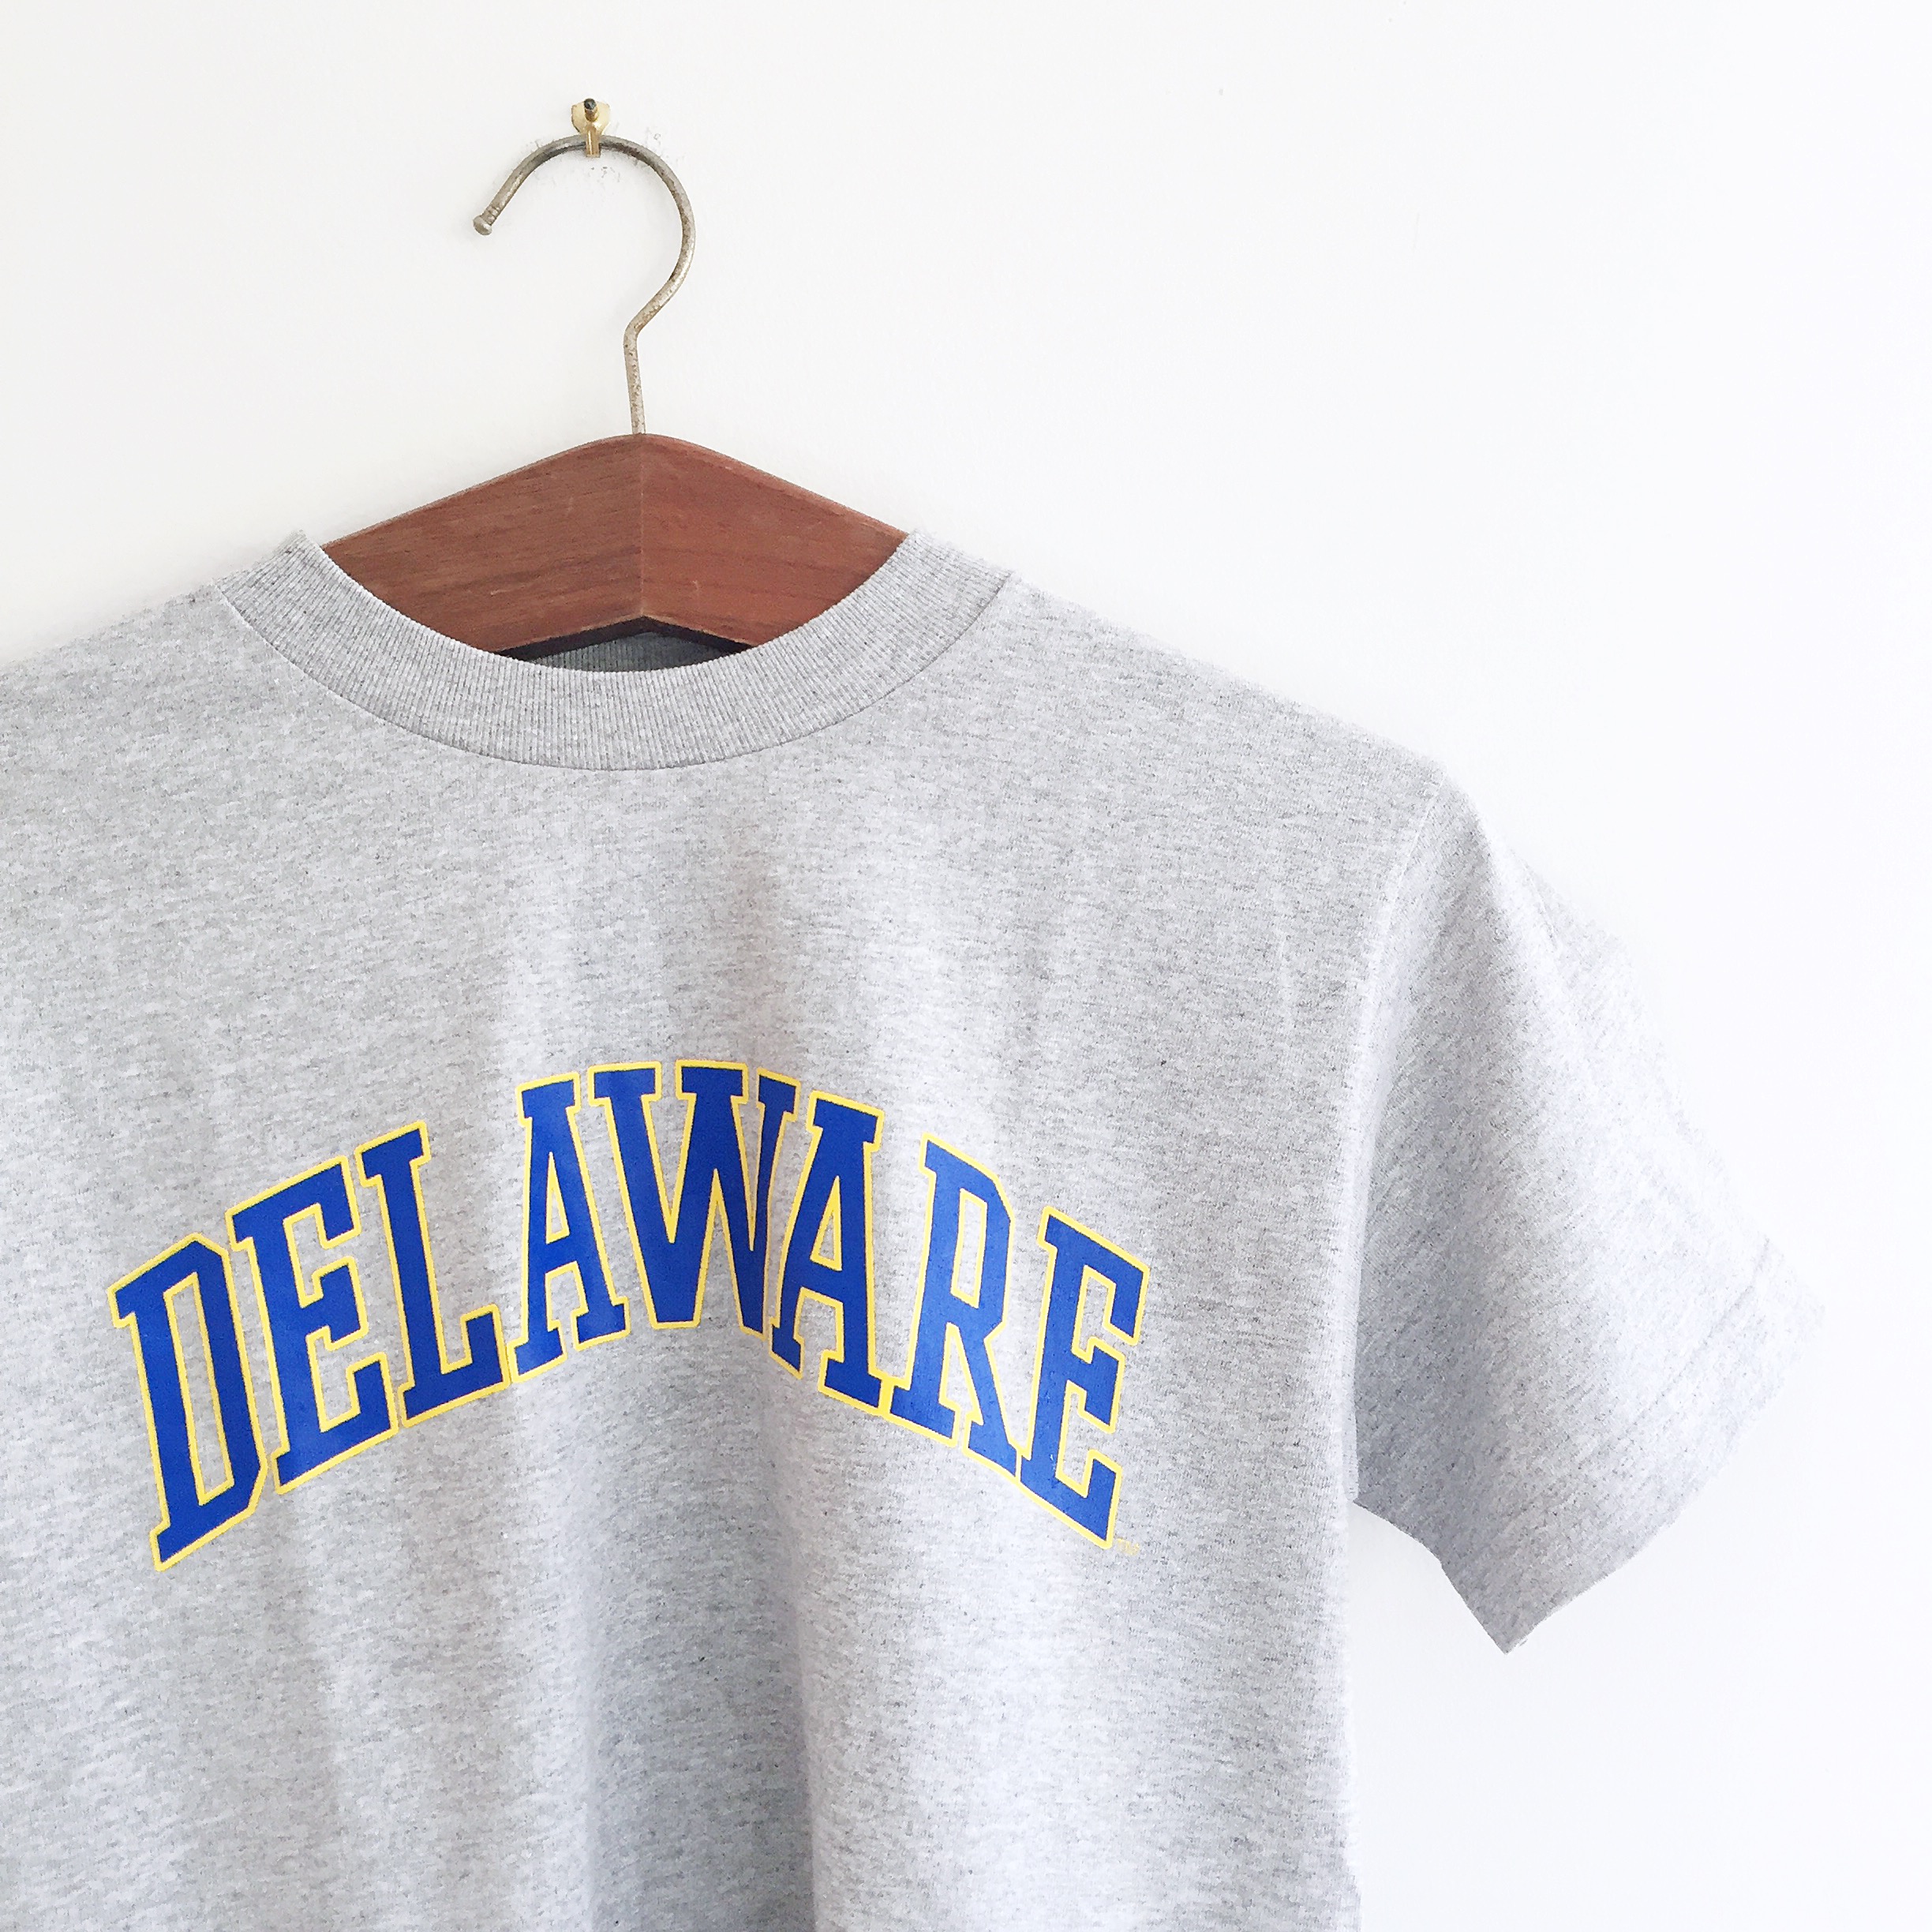 University of Delaware Arched Delaware T-shirt – Oxford – National 5 and 10